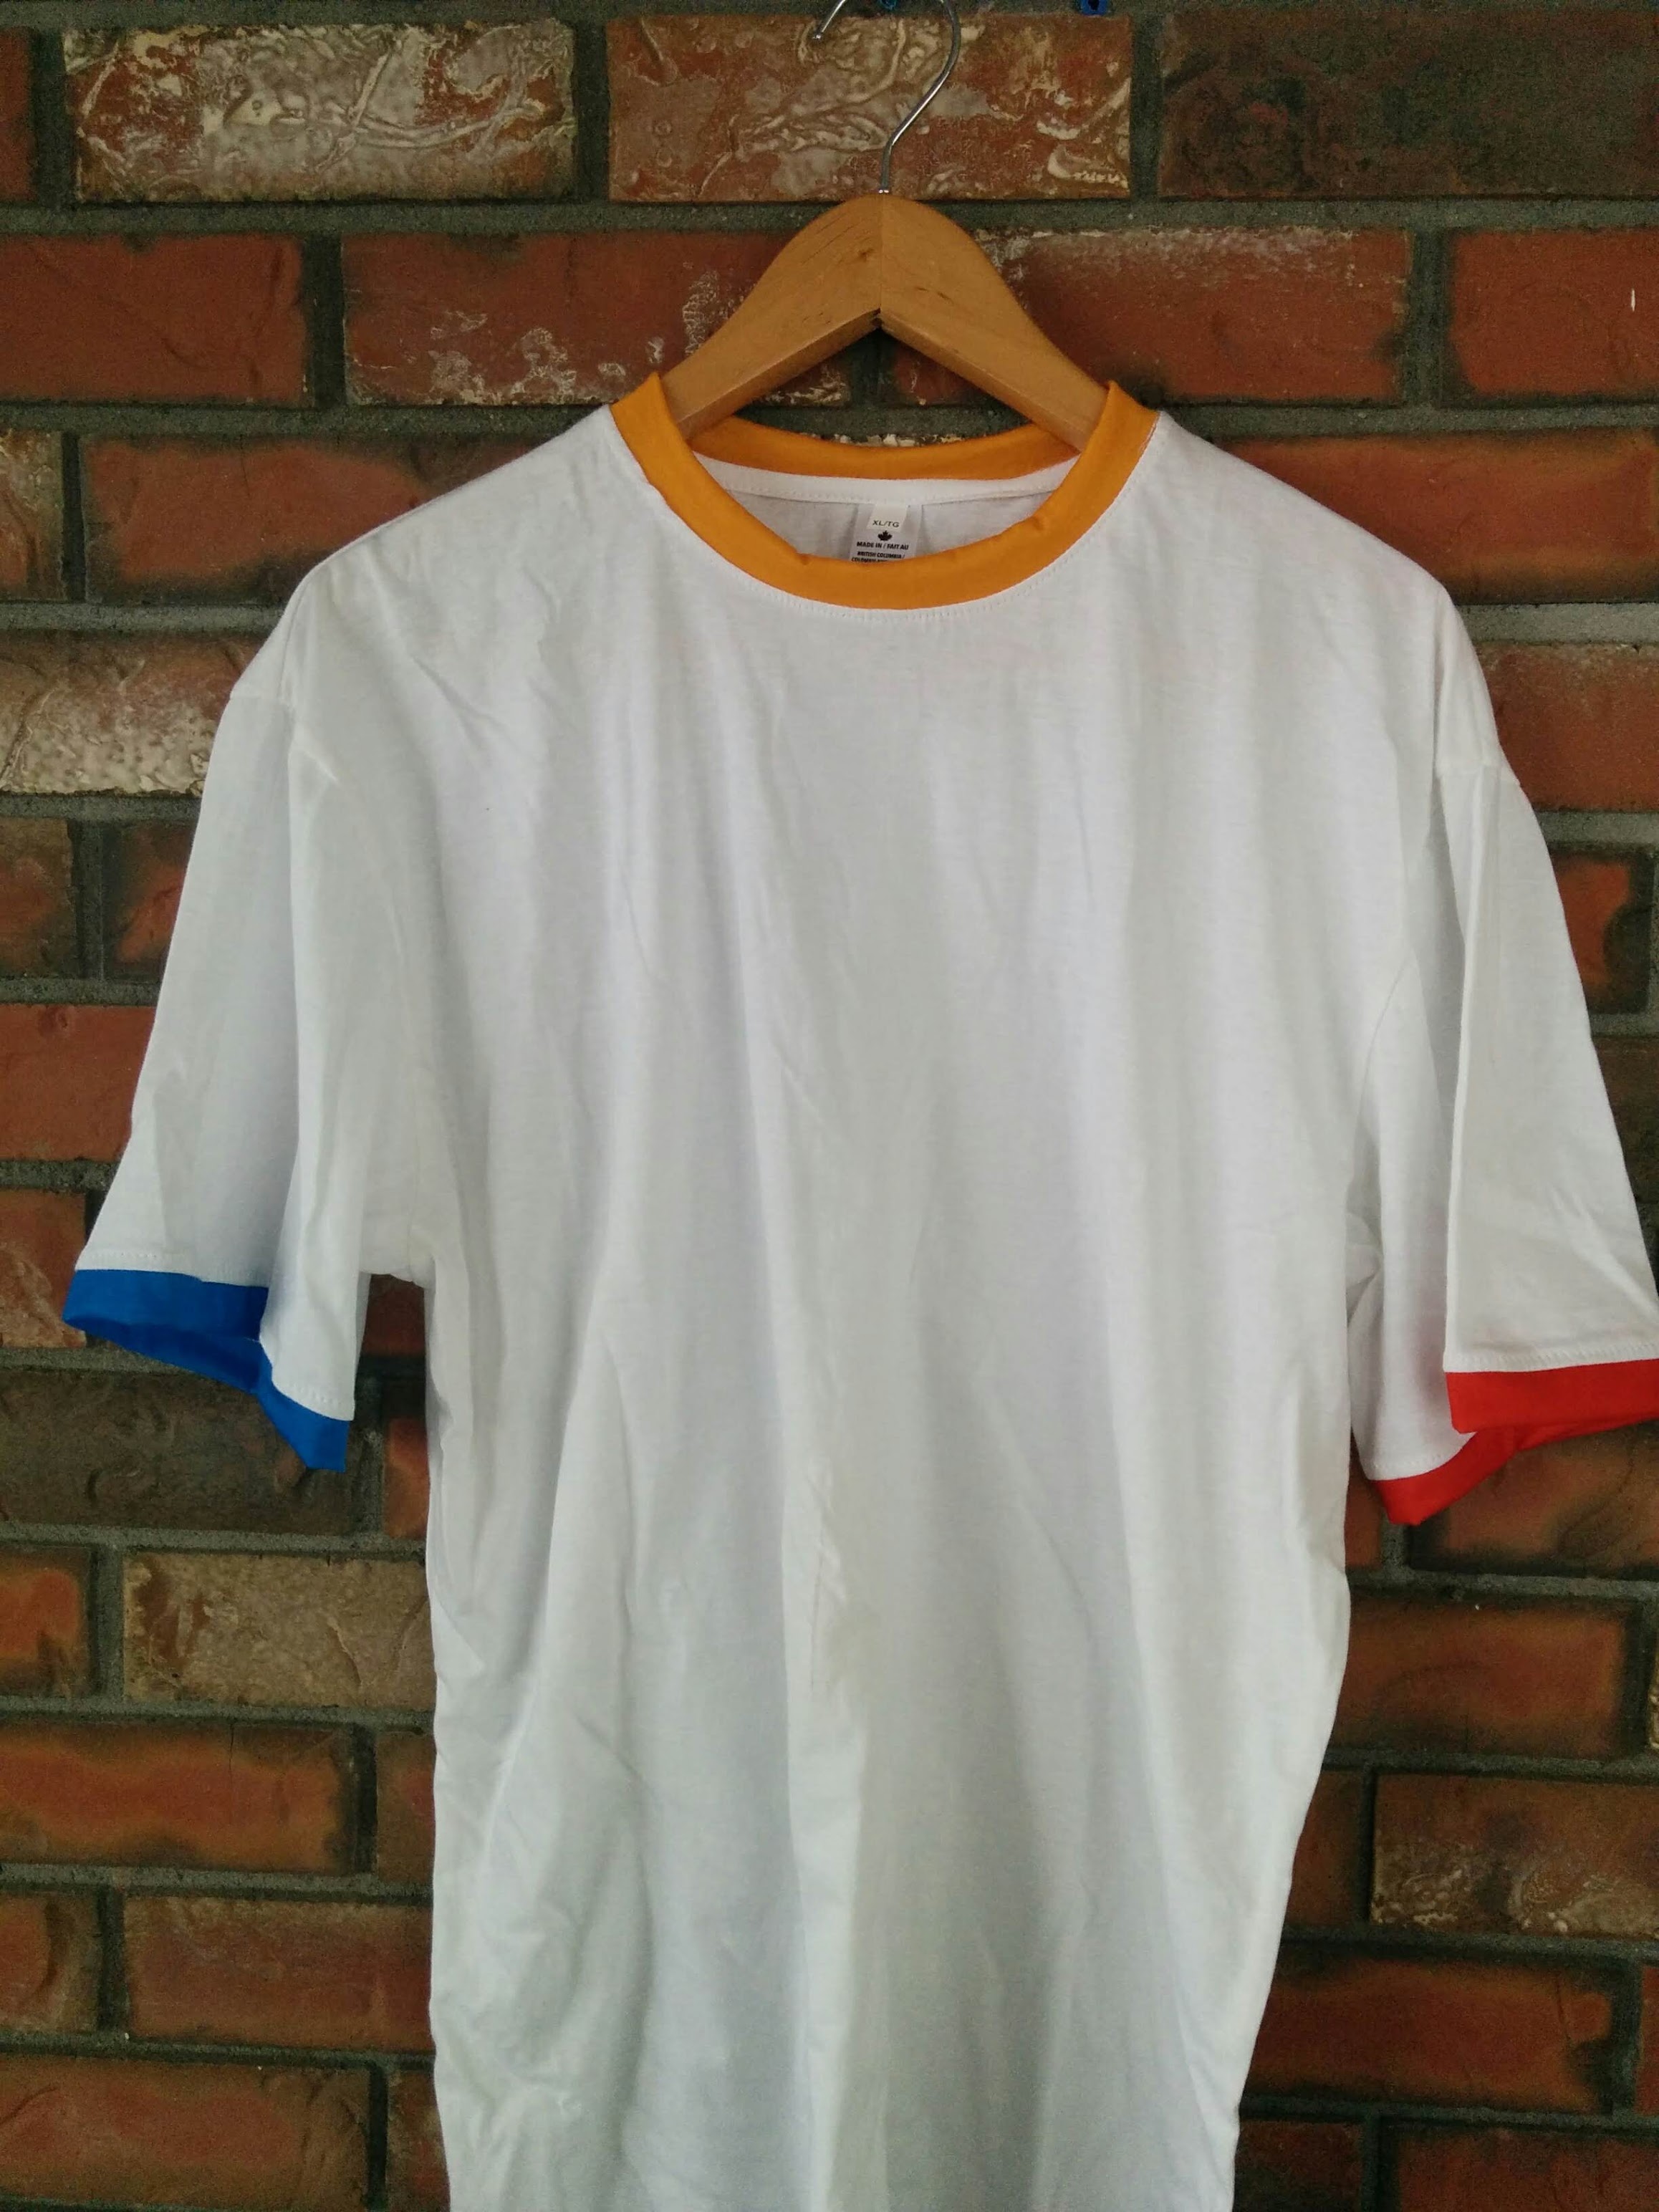 Ringer T-shirt with custom color collar and cuffs